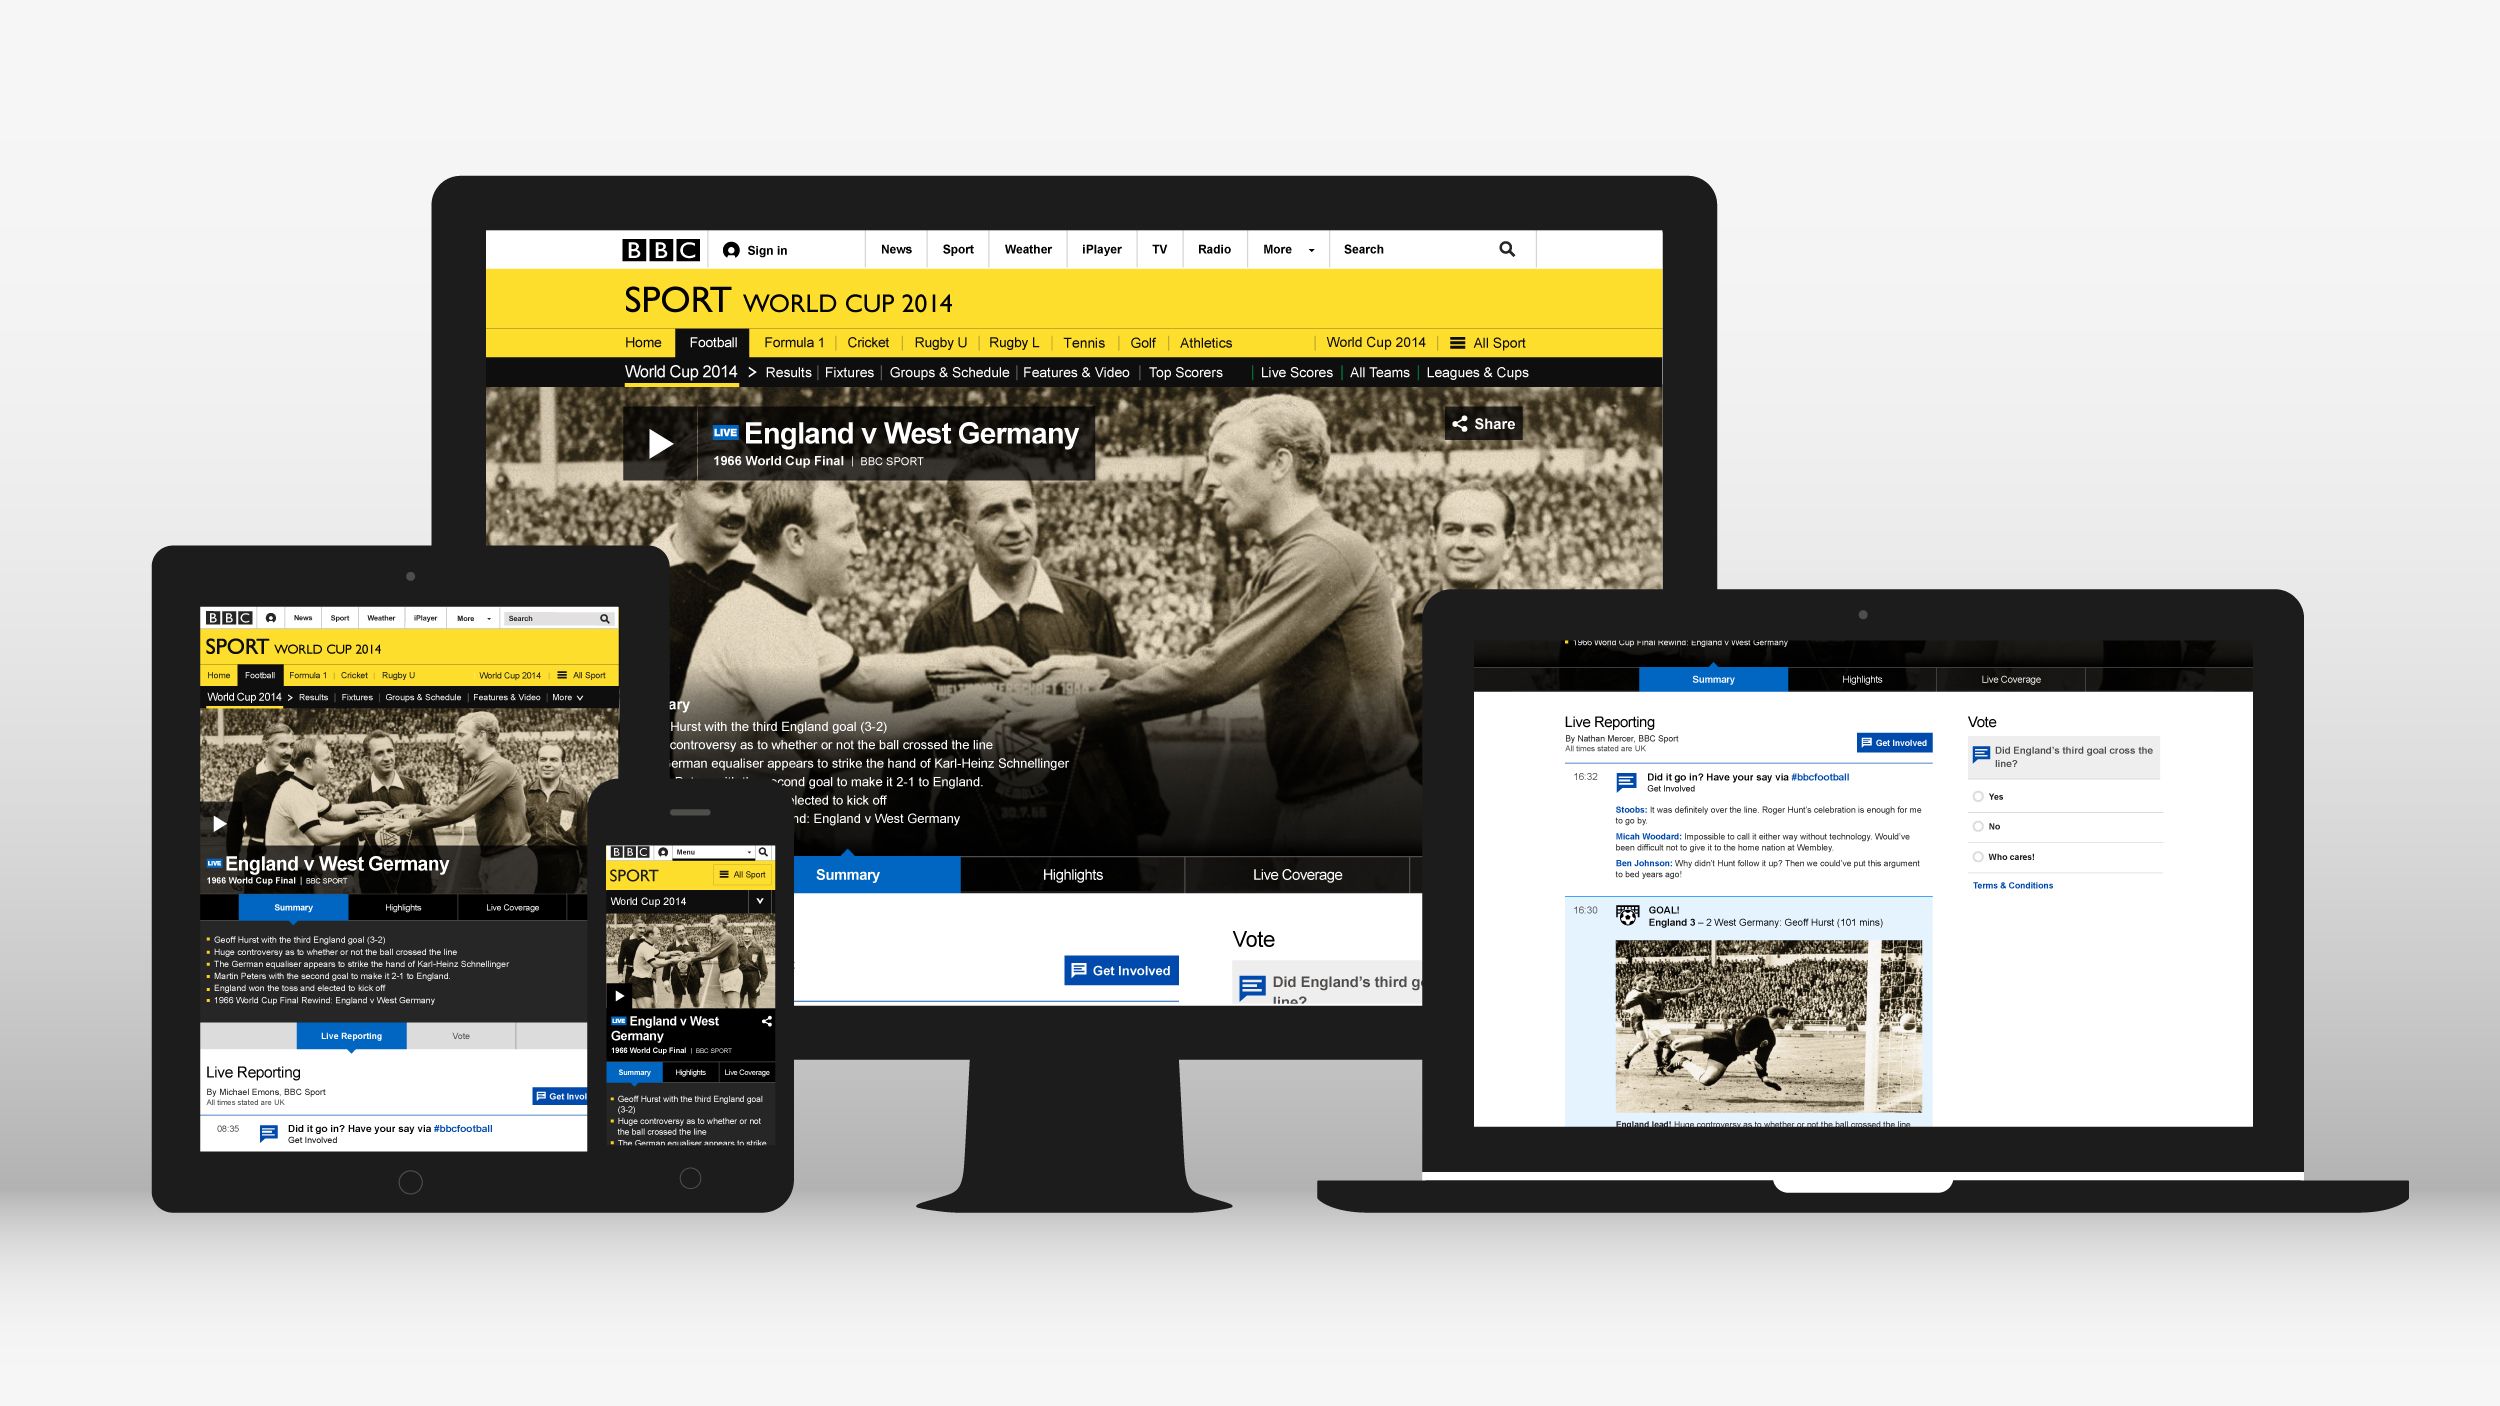 bbc sport will let you relive 1966 world cup glory re imagined for the digital age image 2